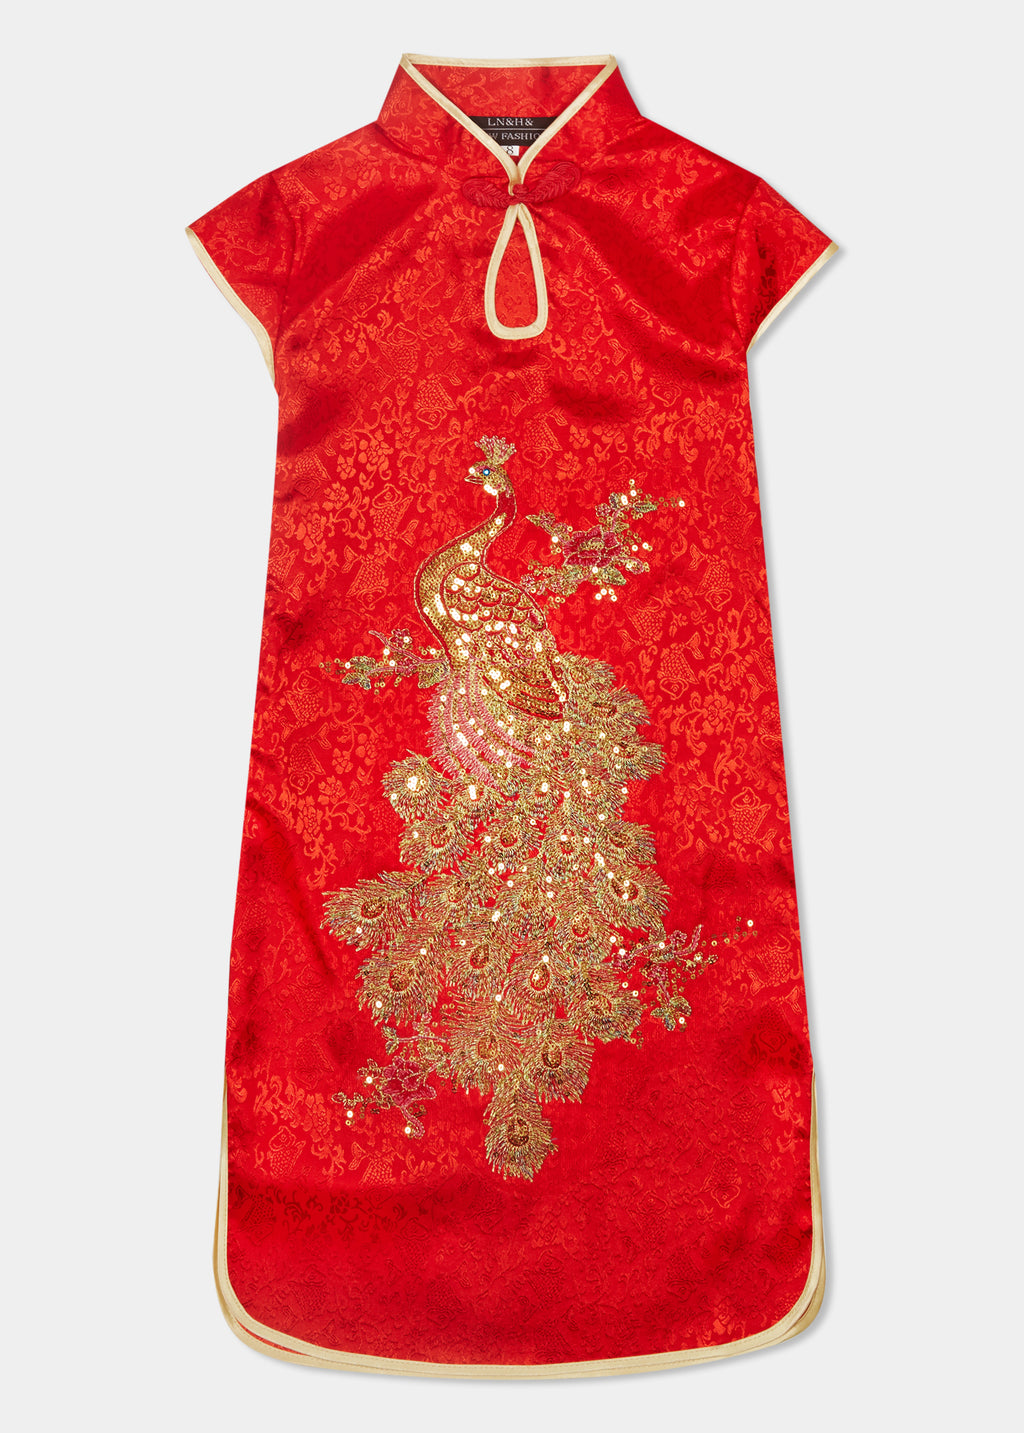 The Cheongsam or Qipao, is a dress with distinctive Chinese features of mandarin collar, side splits and flower and knot frog fastenings. Manufactured in high quality stunning red silky stretch jacquard with a large sequinned embroidered applique to front and contrasting gold binding to neckline and hems